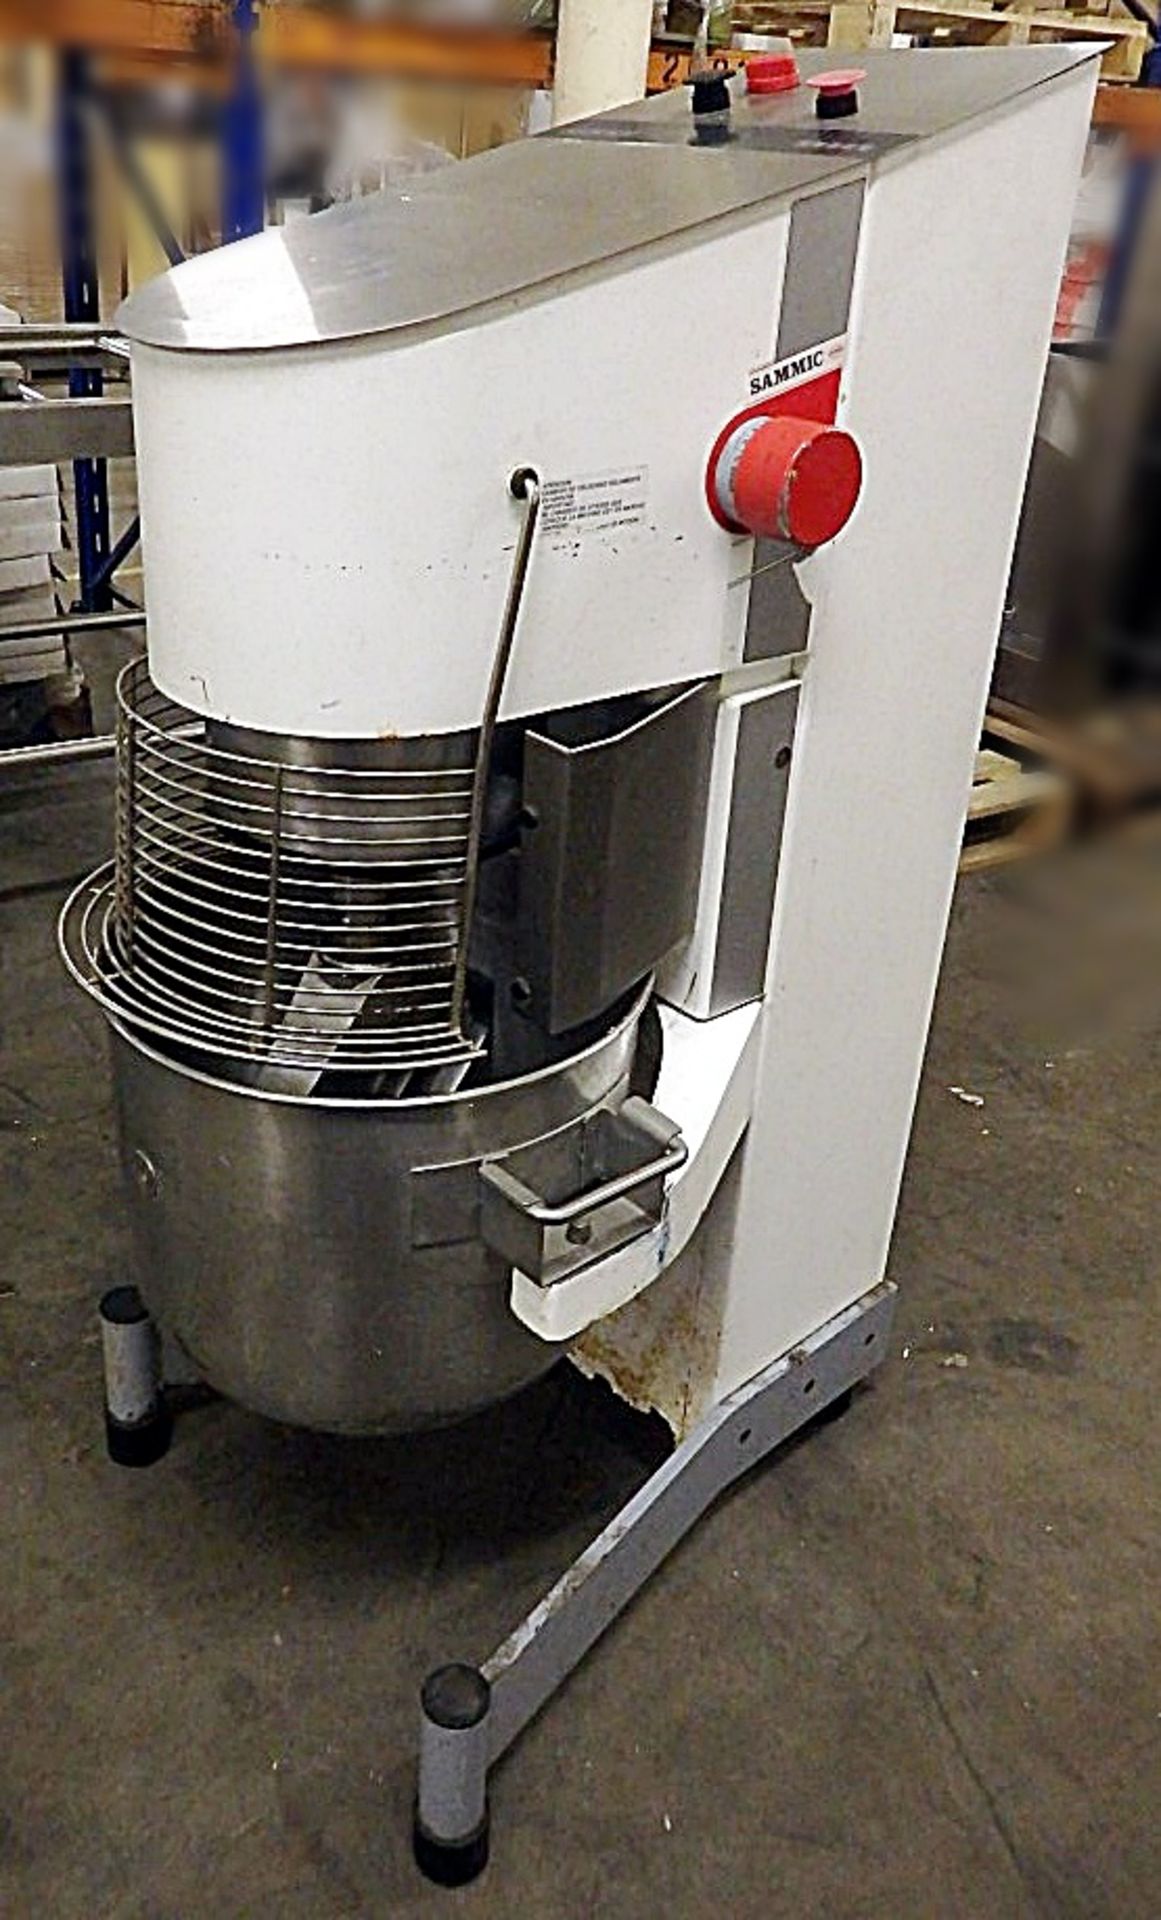 1 x Sammic Planetary Mixer With Whisk, Hook, Paddle - Presented in Good Condition - Dimensions: - Image 2 of 7